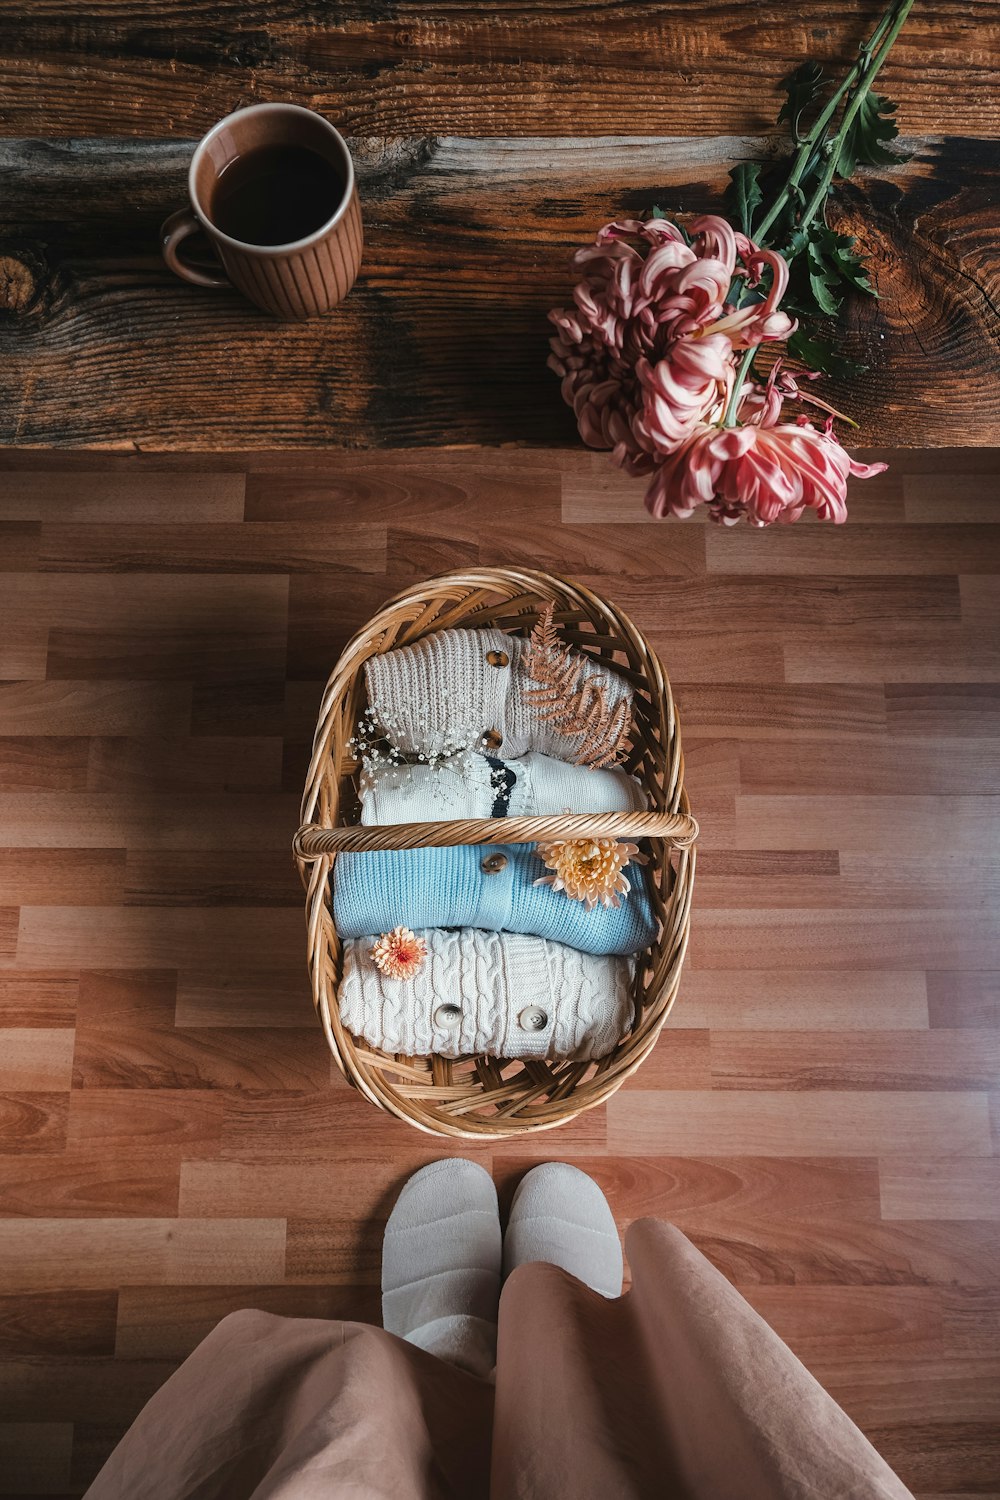 a person standing on a wooden floor next to a basket of clothes